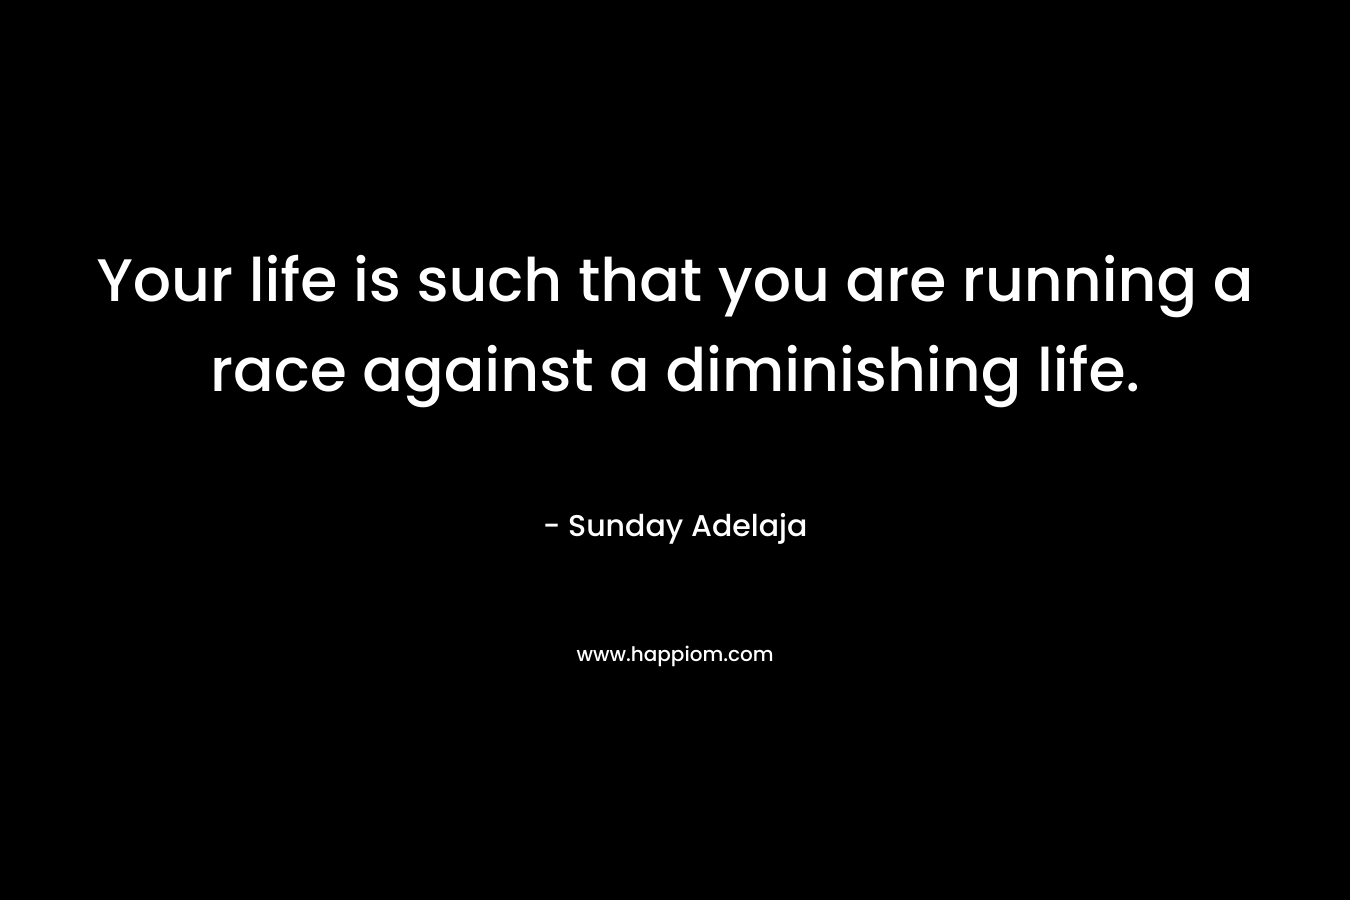 Your life is such that you are running a race against a diminishing life.